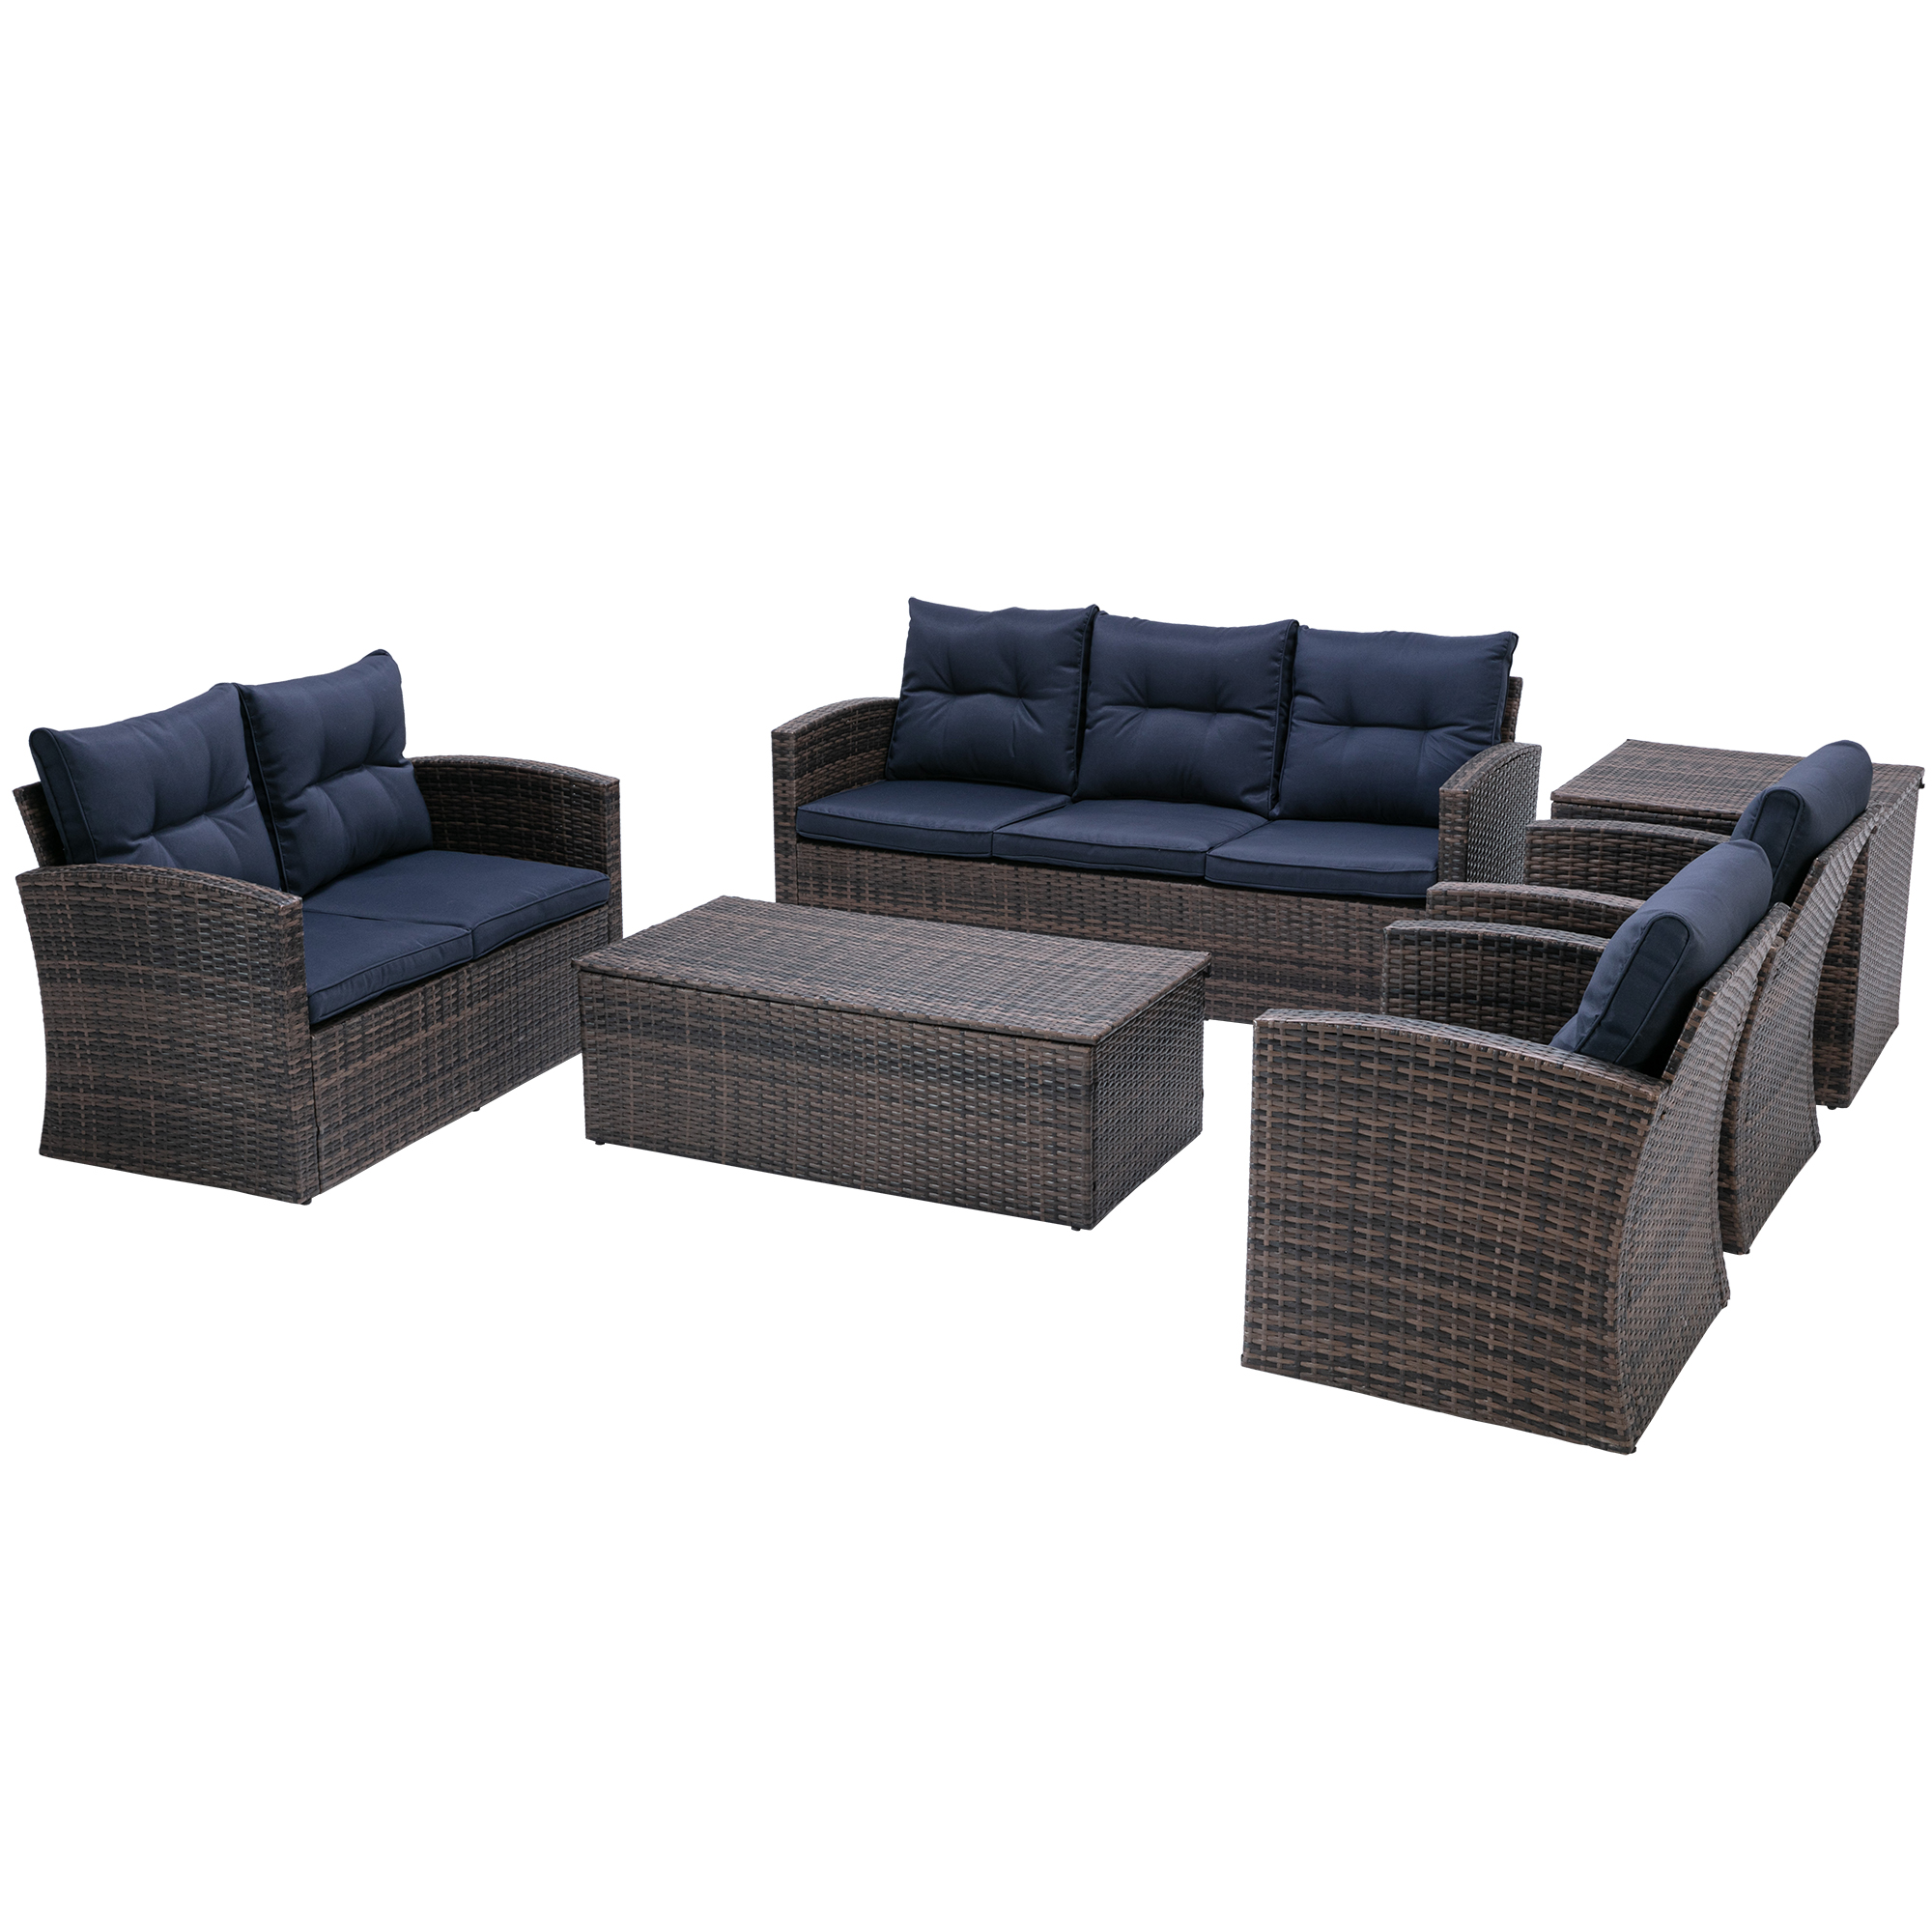 6 PCS Rattan Sectional Set and Table with Storage in Brown, Navy Blue Cushions-Boyel Living